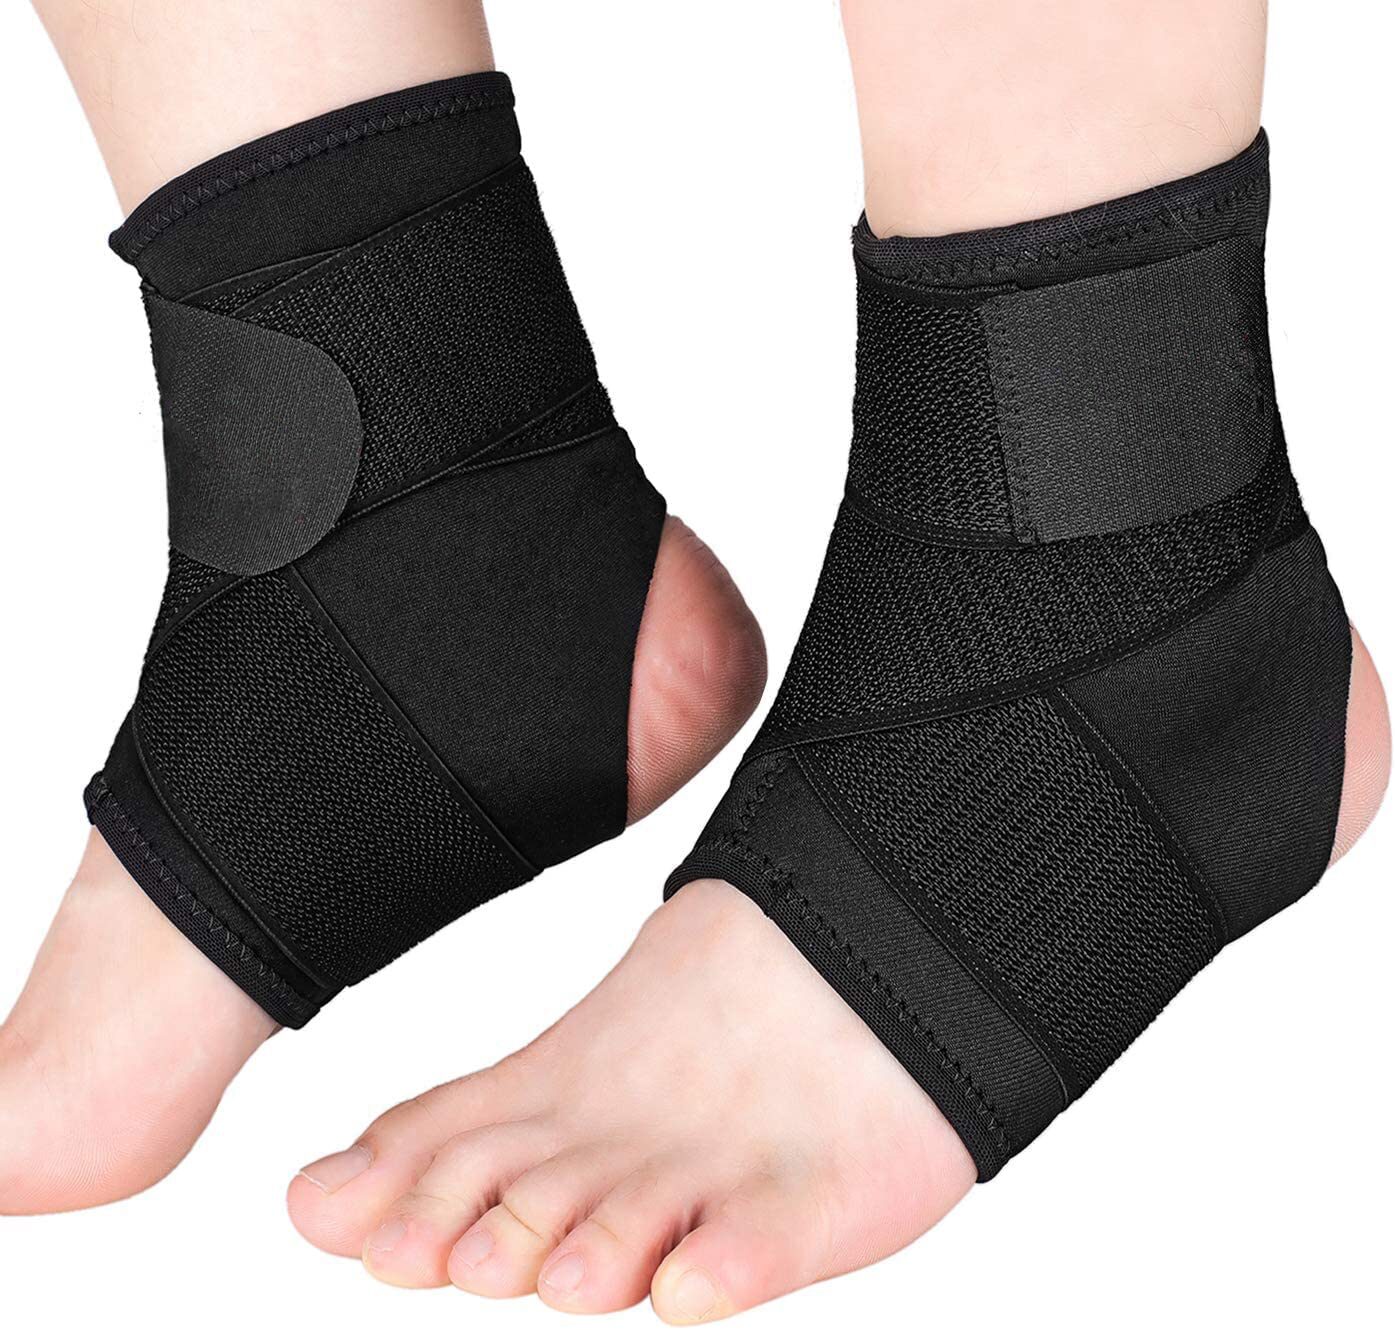 1x Pair of Foot Ankle Wraps - Nuova Health